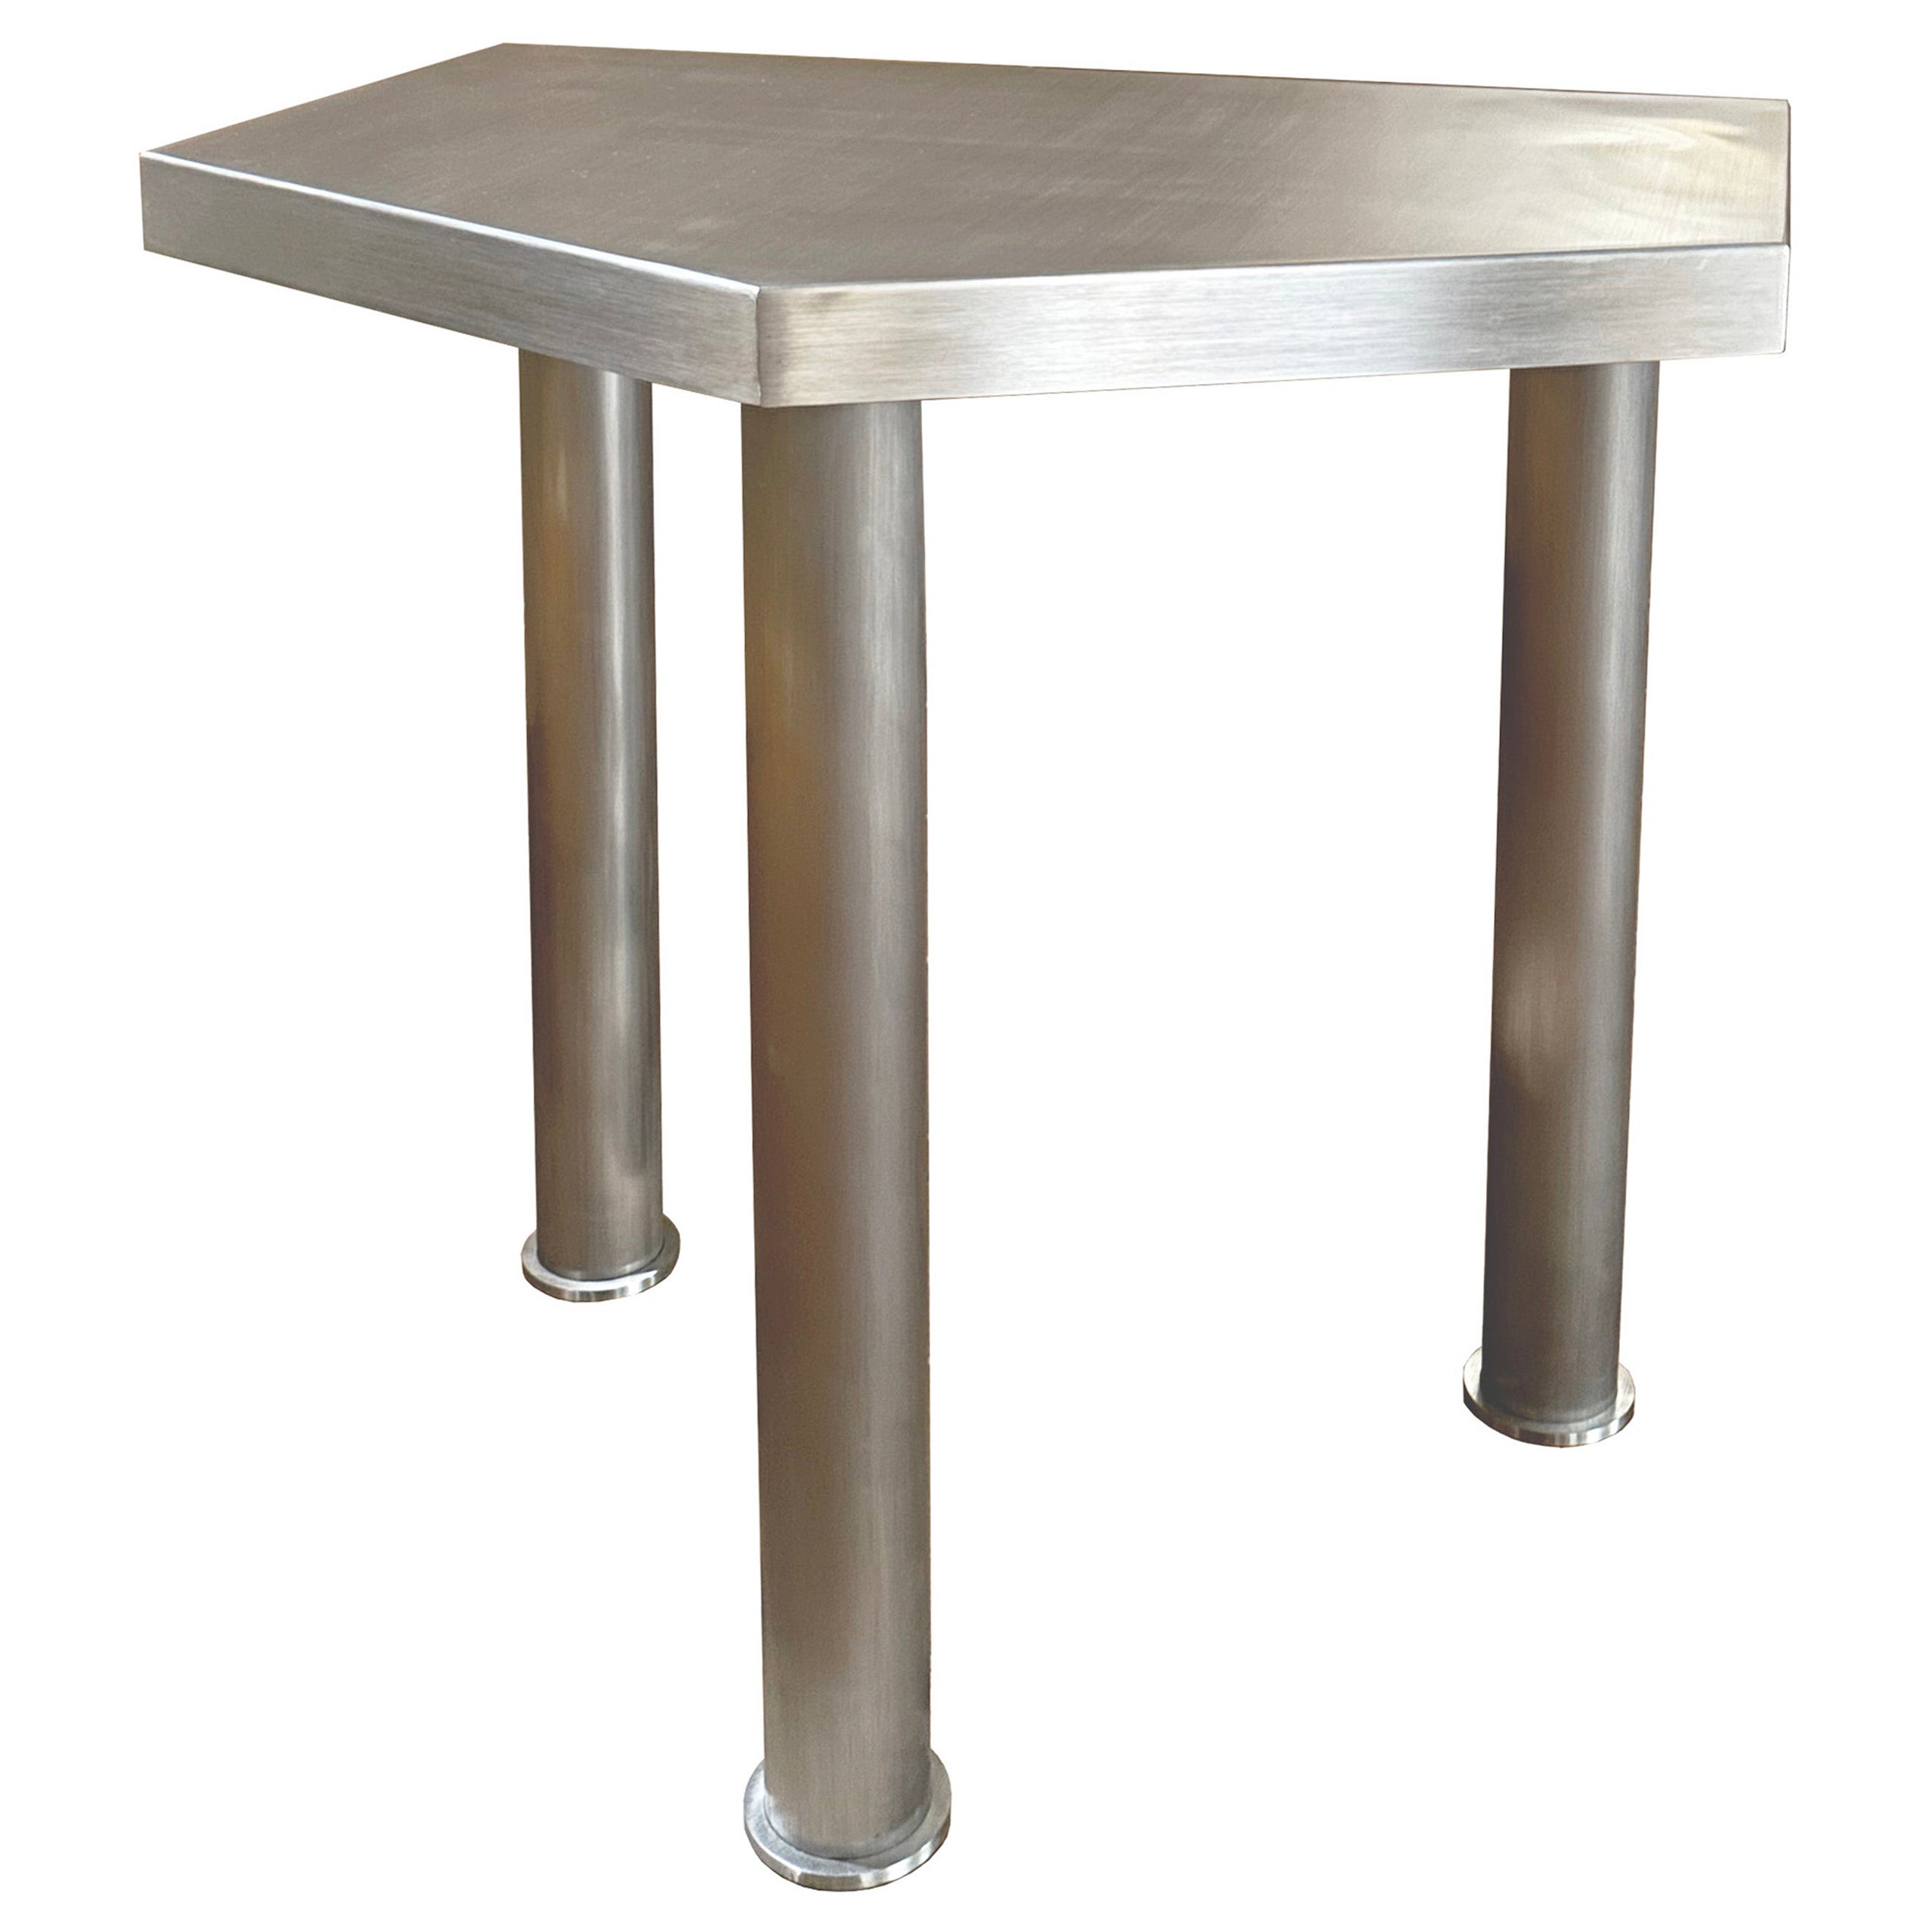 “Running Gun” Accent Table, Iron, James Vincent Milano, Italy, 2023